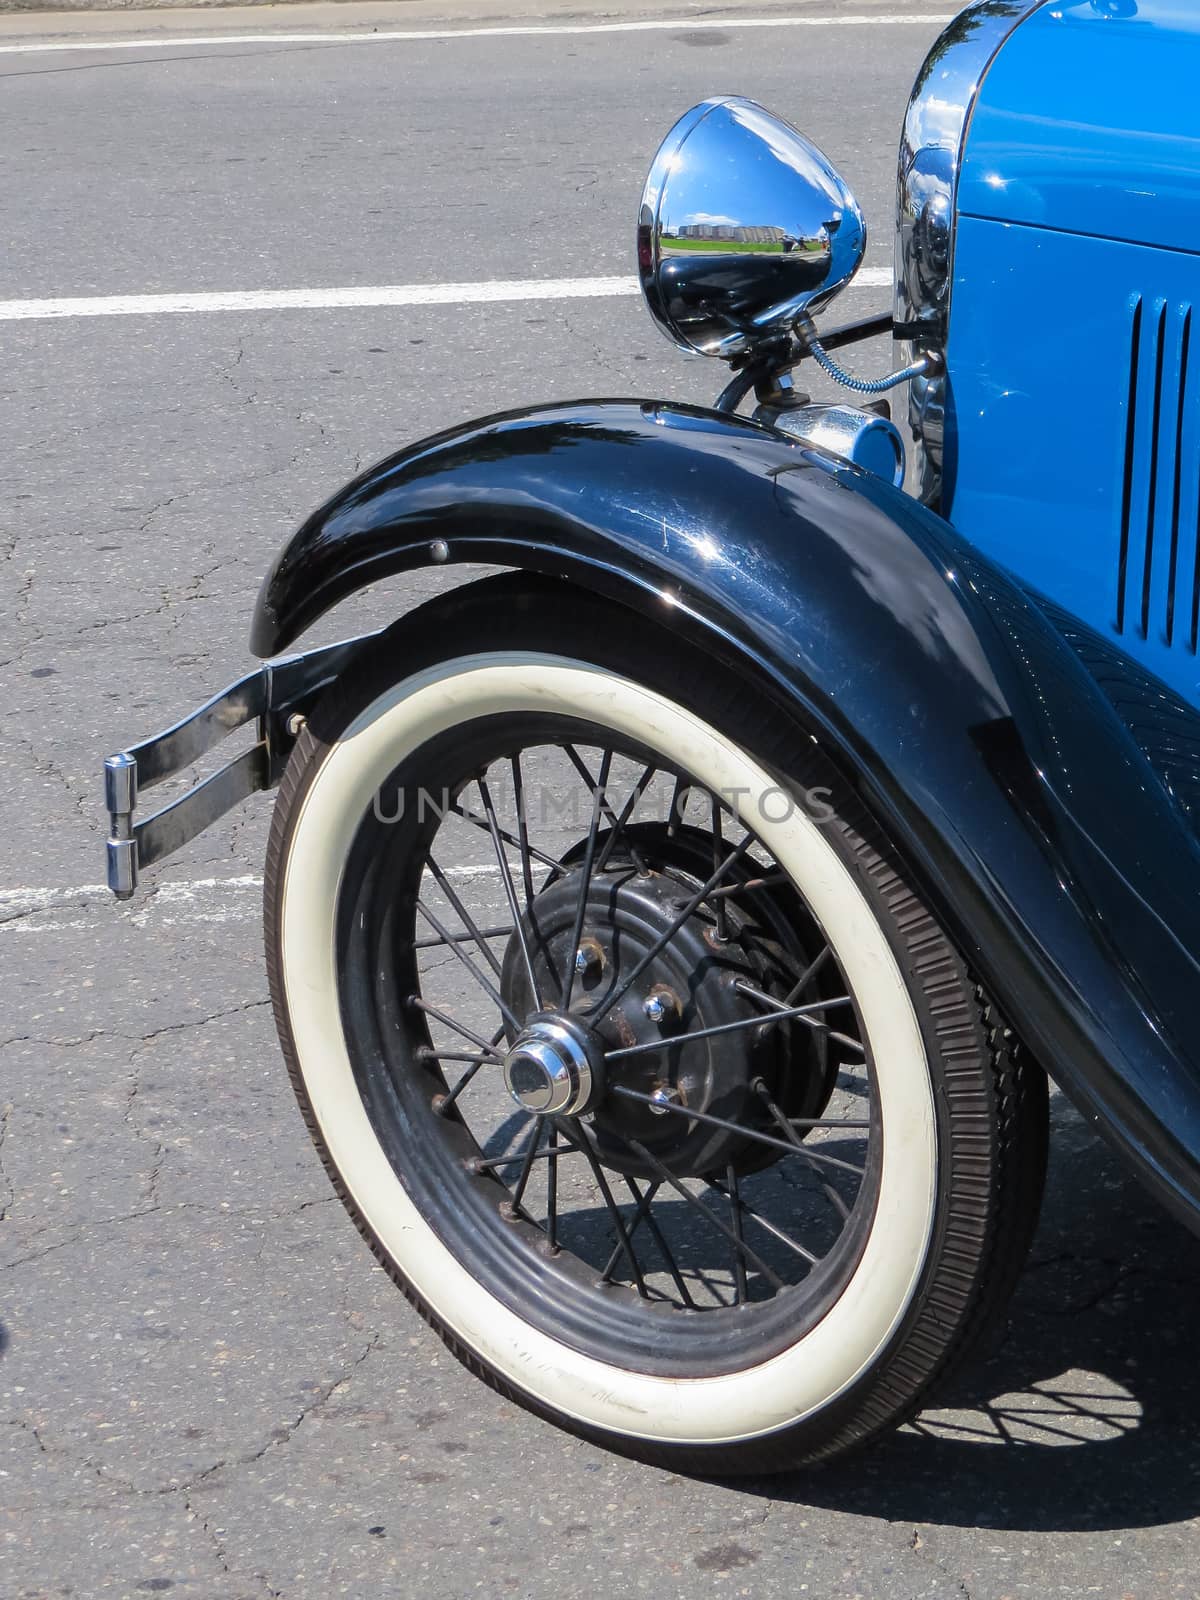 Old blue classic car, wheel detail and mudguards and chrome in sunny day.